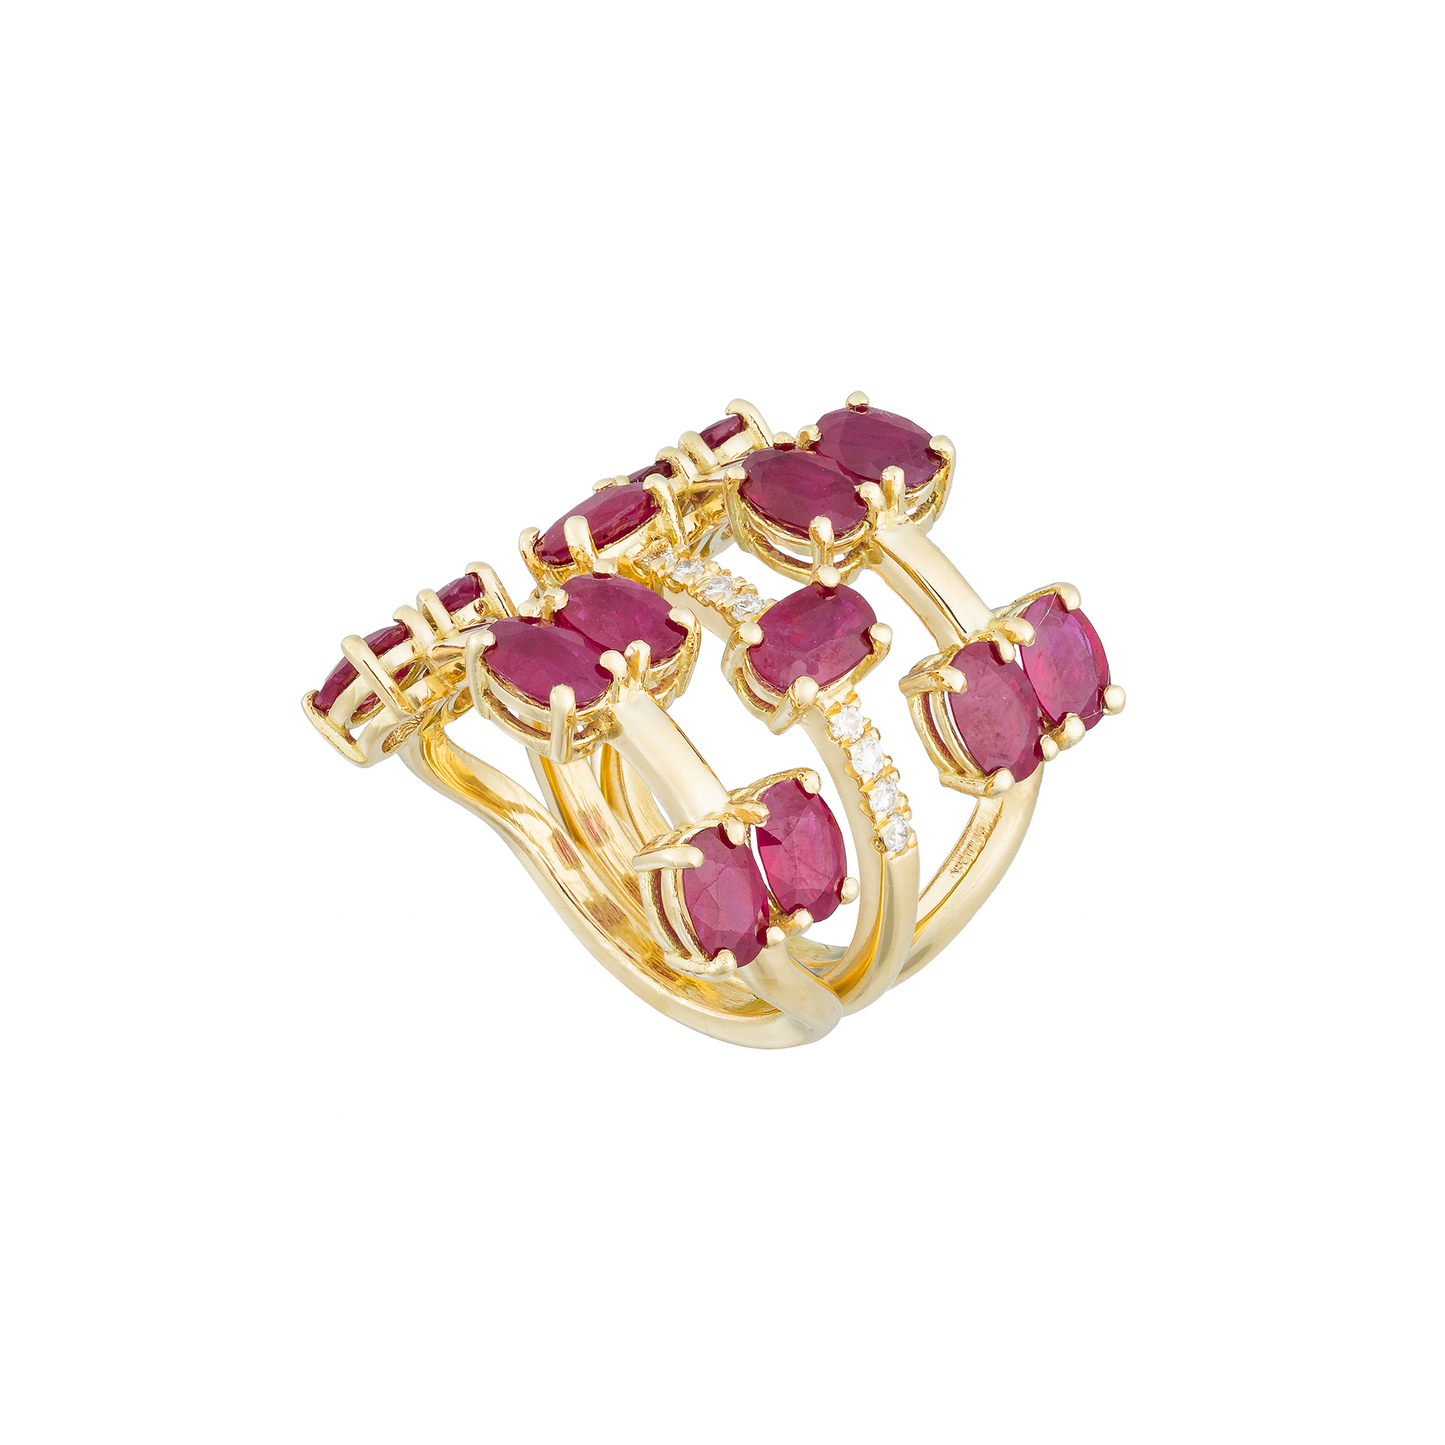 Colored Constellation 18K Yellow Gold Ring with Rubies